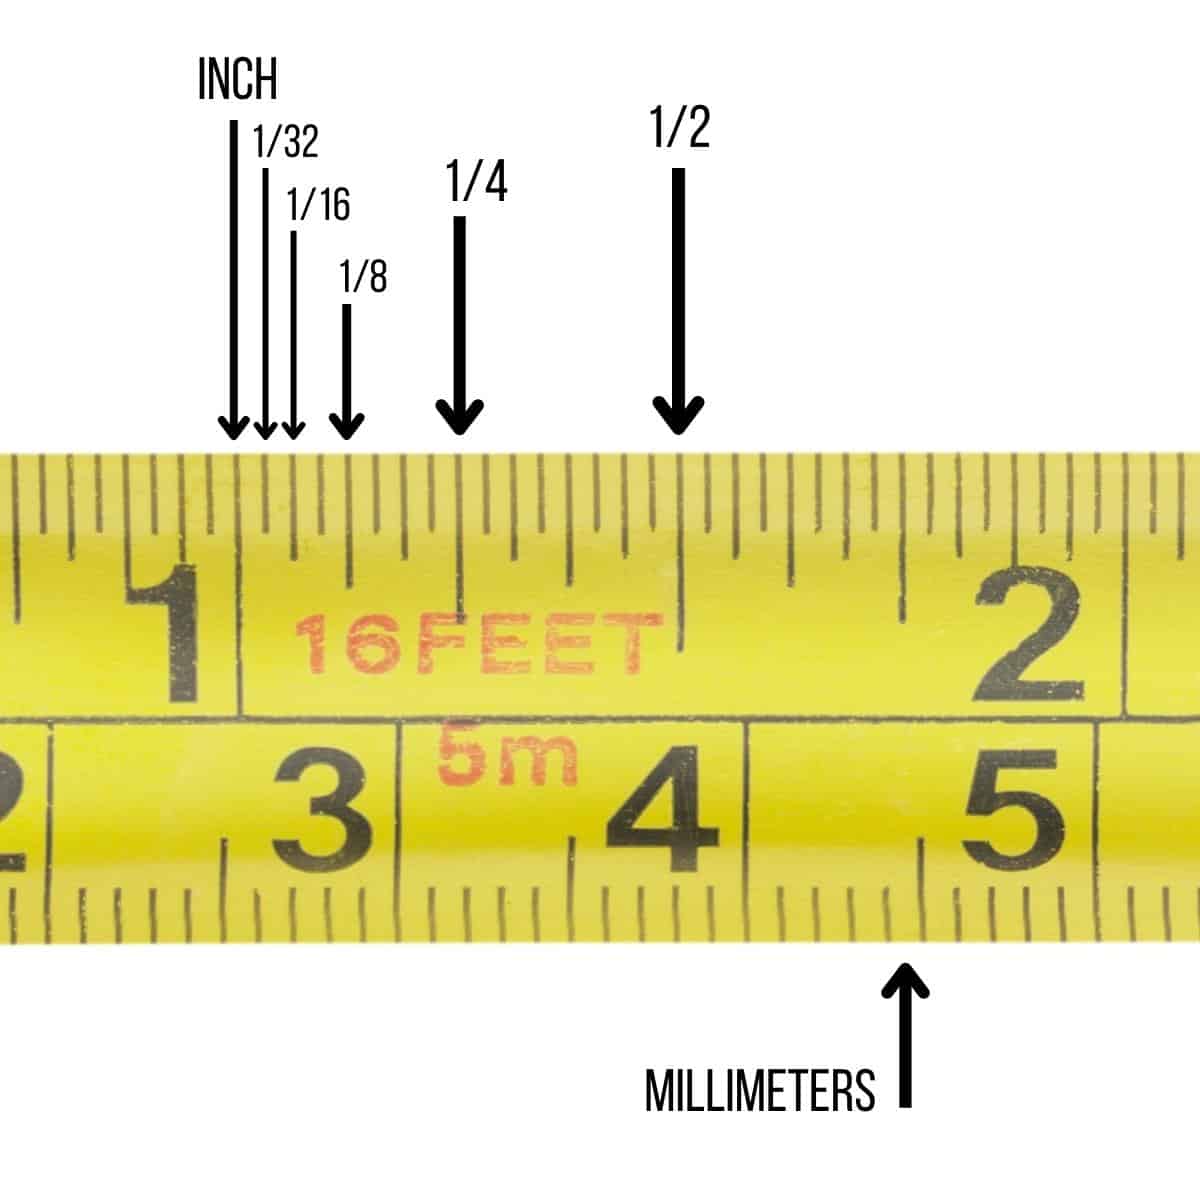 How to Read a Tape Measure, Reading Measuring Tape With Pictures, Construction Measuring Tools, Using Tape Measures